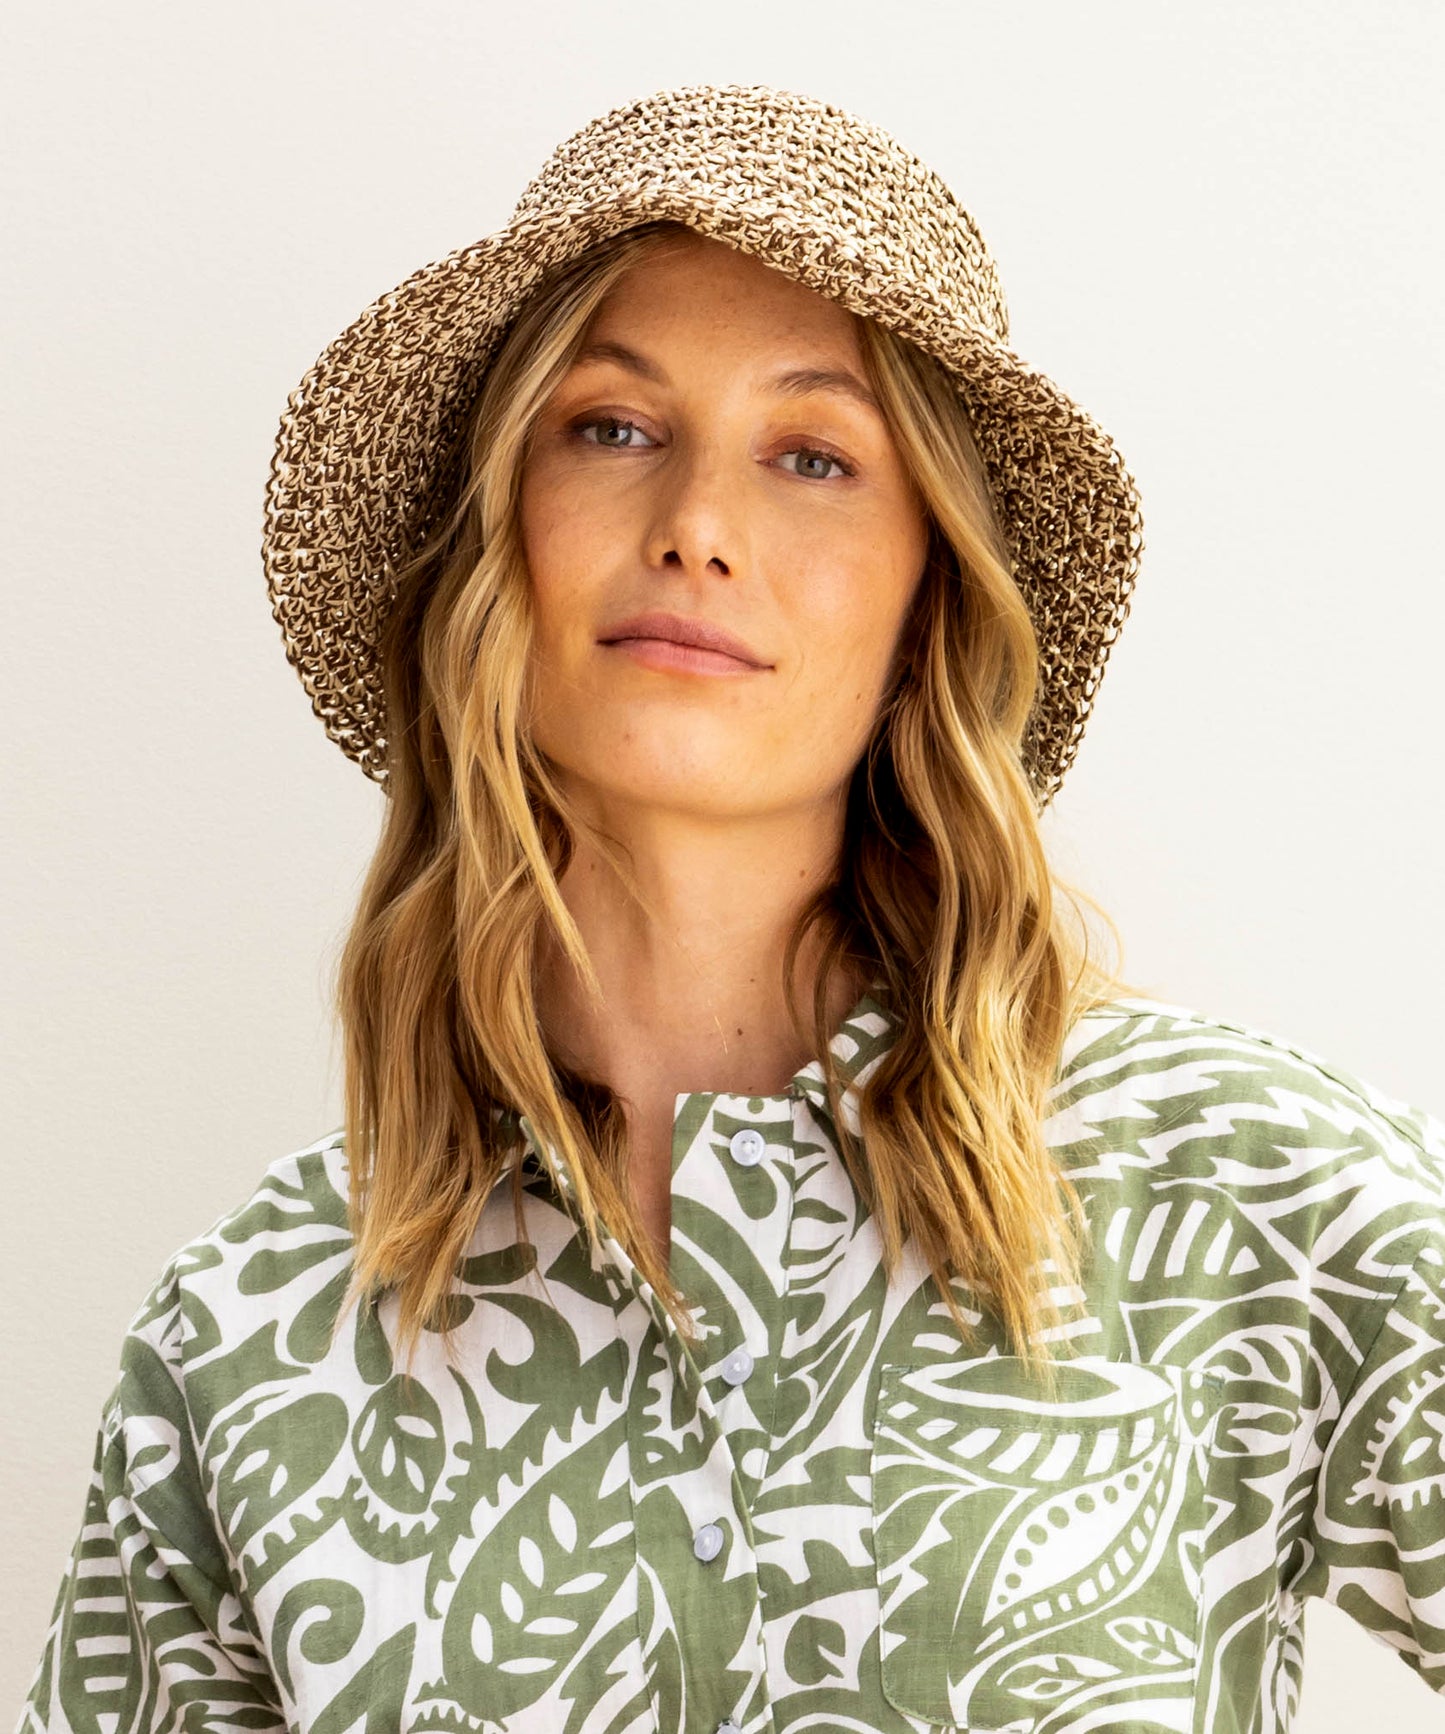 Marled Bucket Hat in color Natural on a model